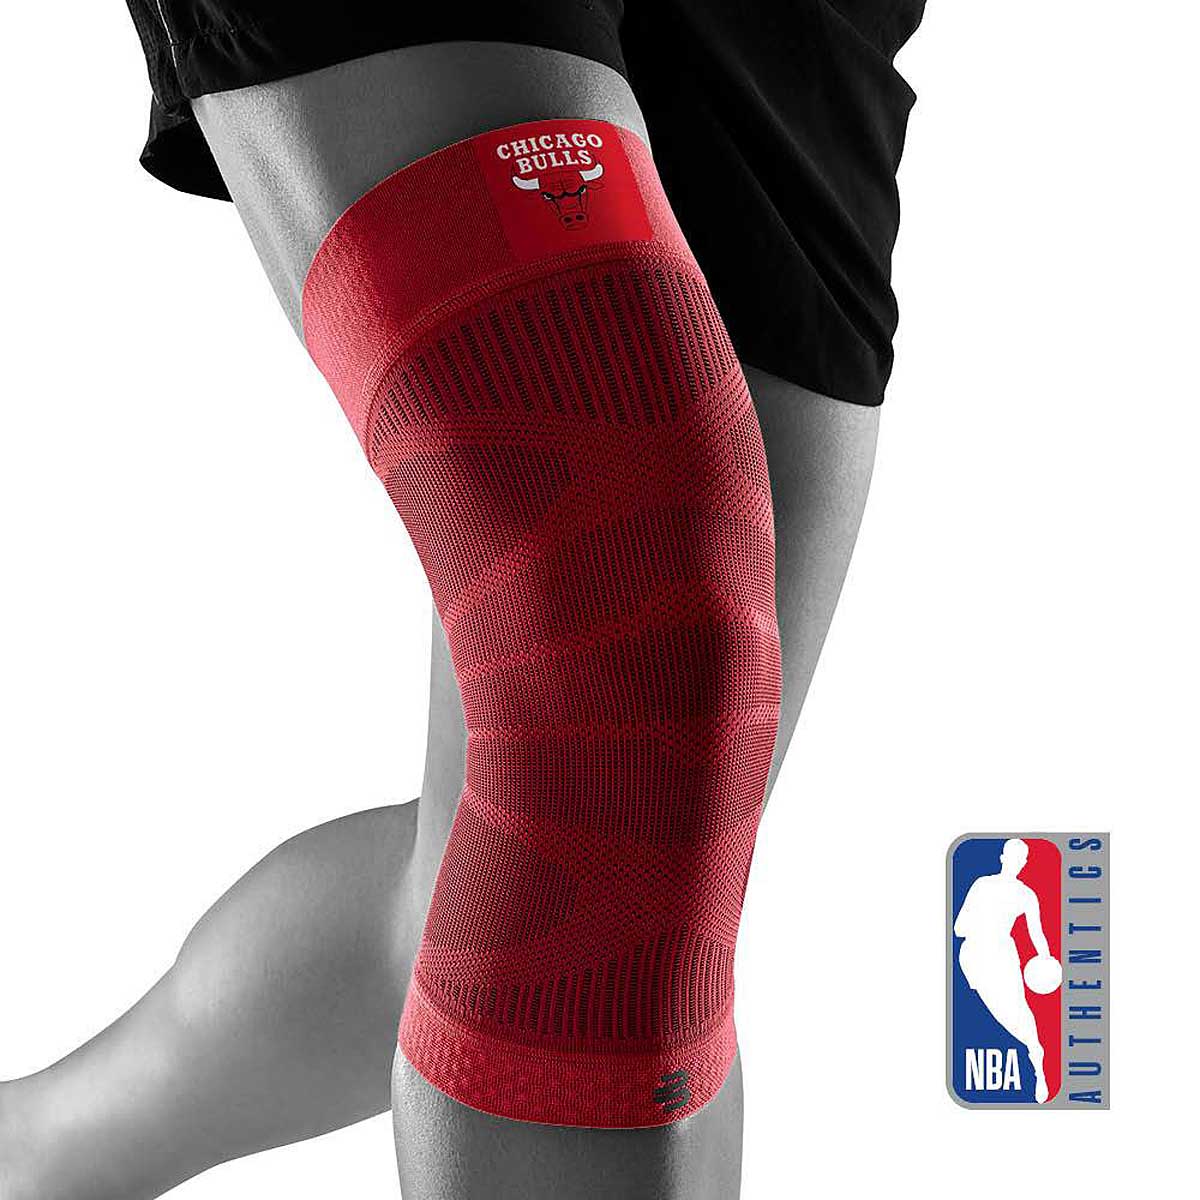 Bauerfeind Nba Sports Compression Knee Support Chicago Bulls, Bulls Red